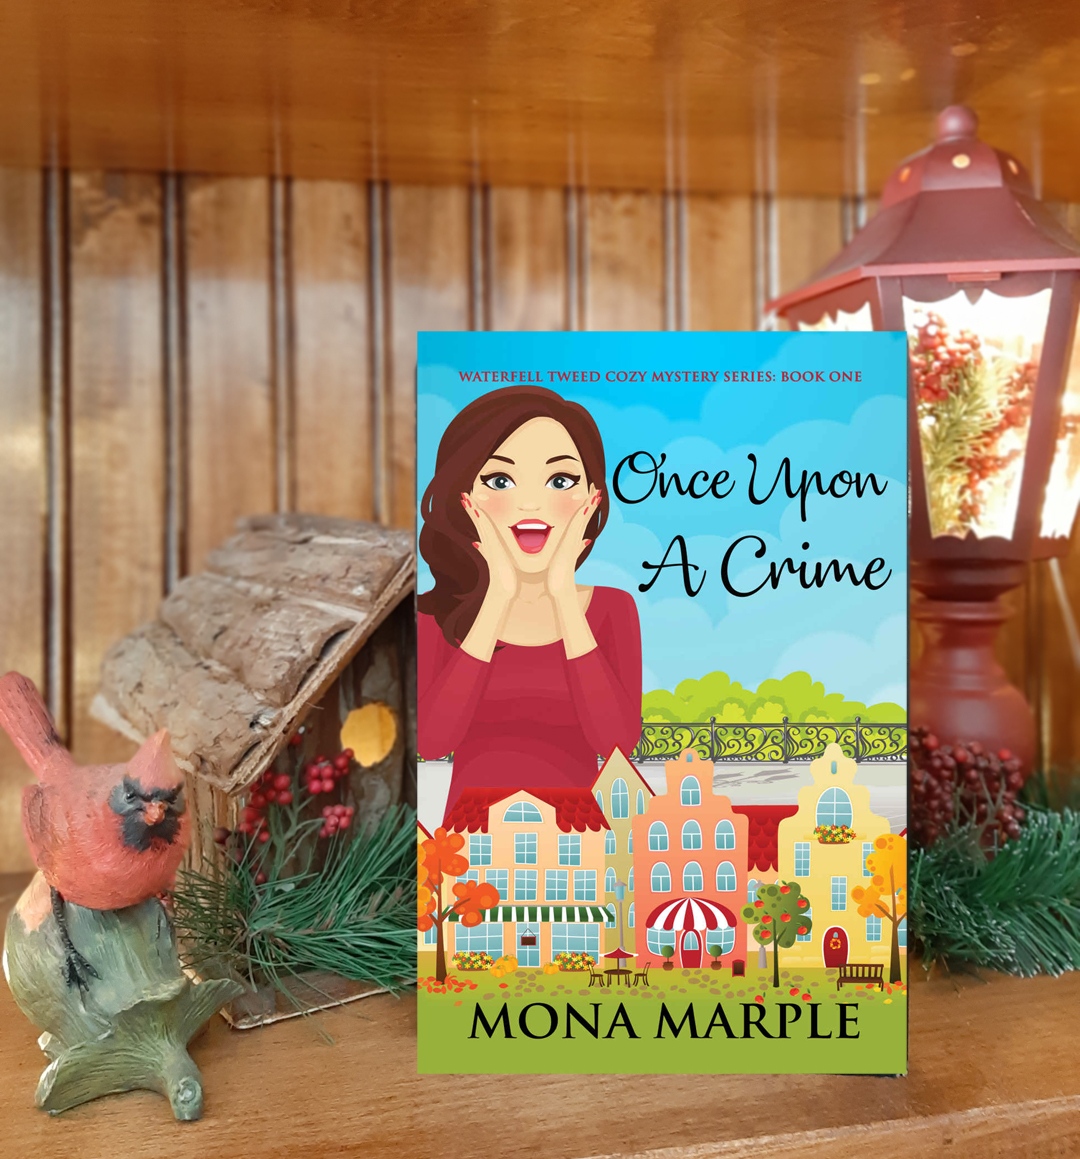 Mona Marple – Once Upon a Crime (Waterfall Tweed Cozy Mystery Series #1)